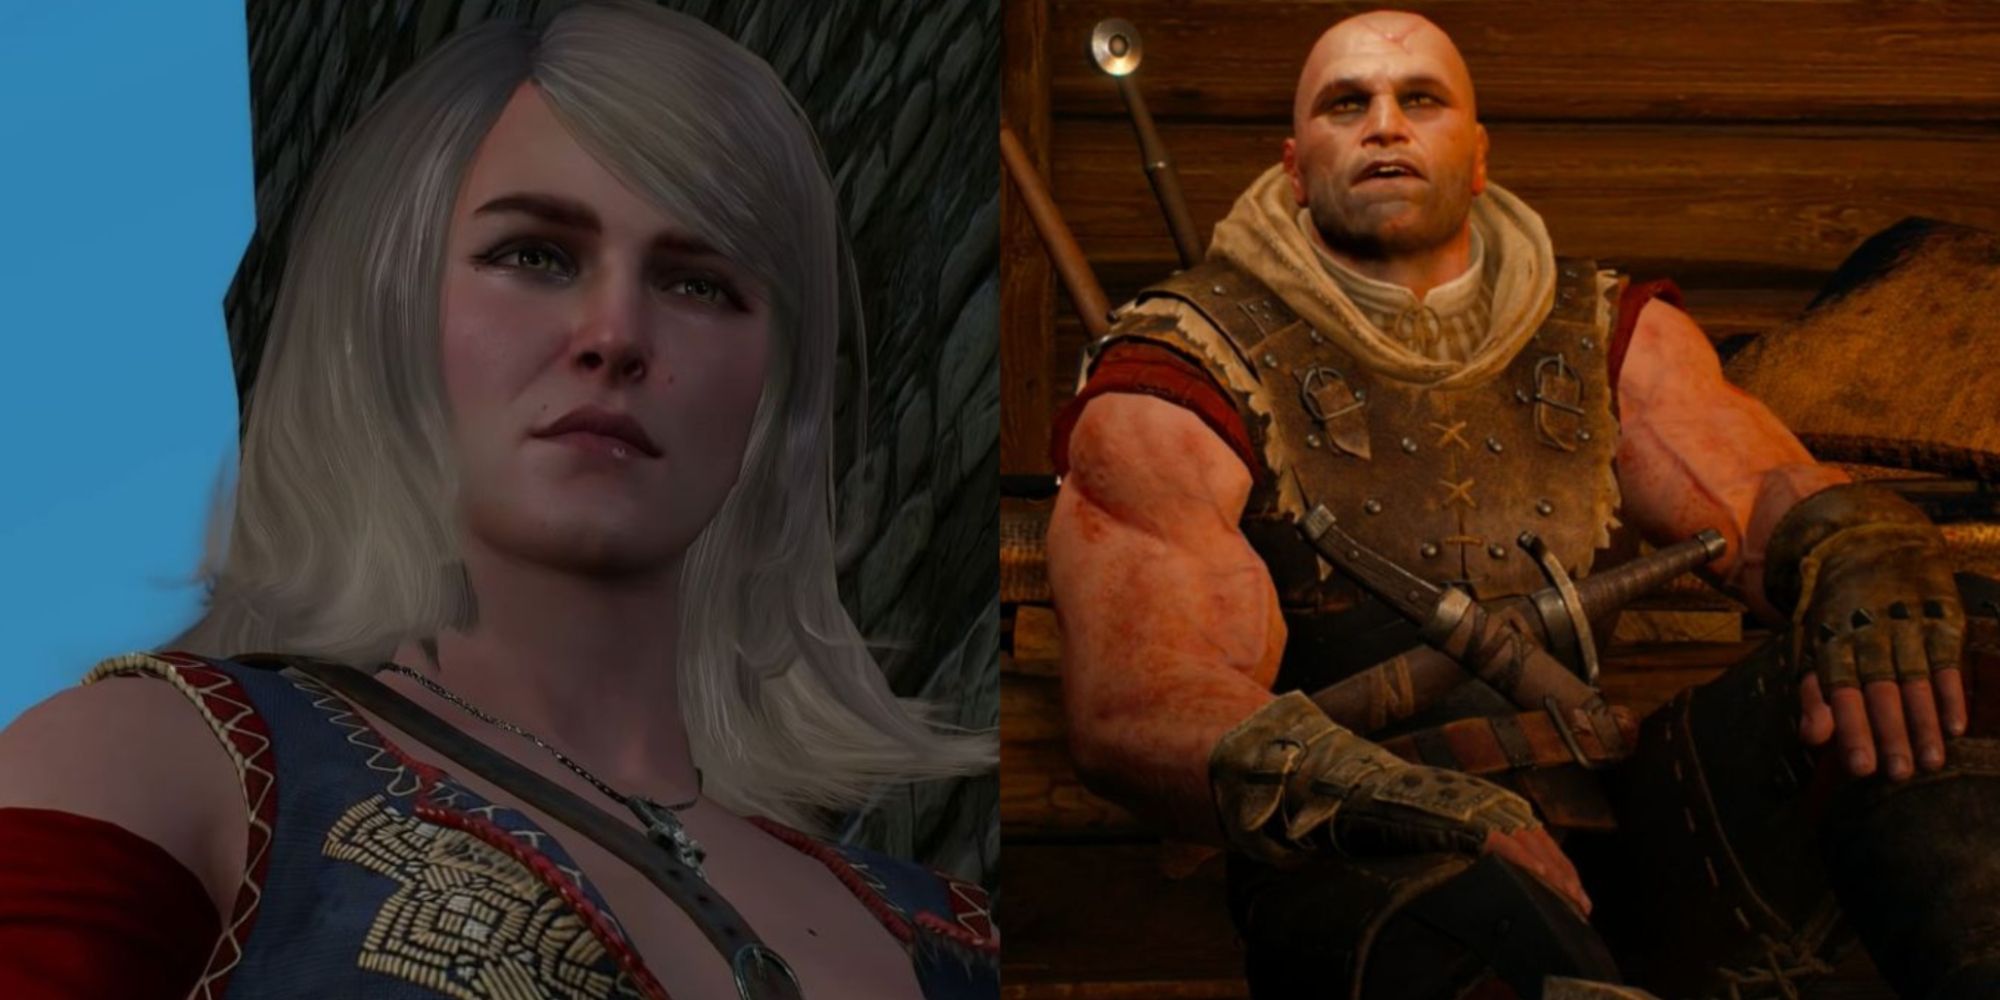 The Witcher 3 Full Crew Featured Split Image Keira and Letho